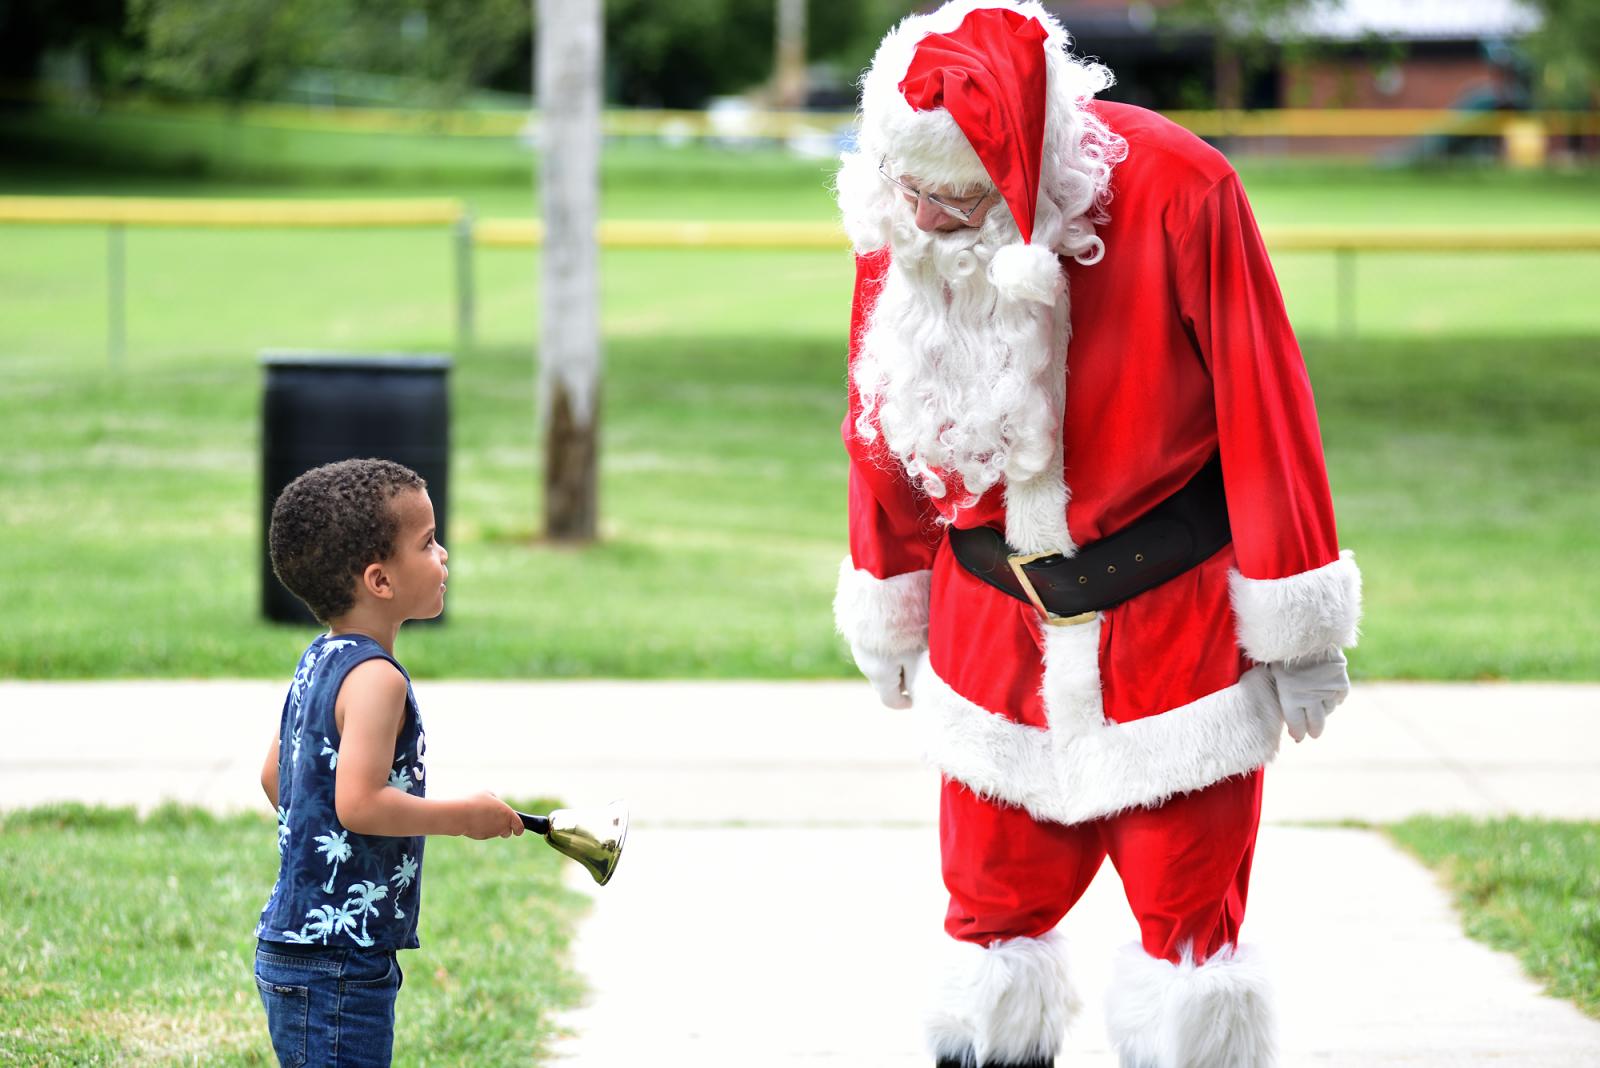 Kephas O., 4, rings a bell given to him by Santa Claus on Thursday, July 15, 2021 at Douglass Park in Columbia. Santa delivered presents to kids that attended the Christmas in July party hosted by the Voluntary Action Center.